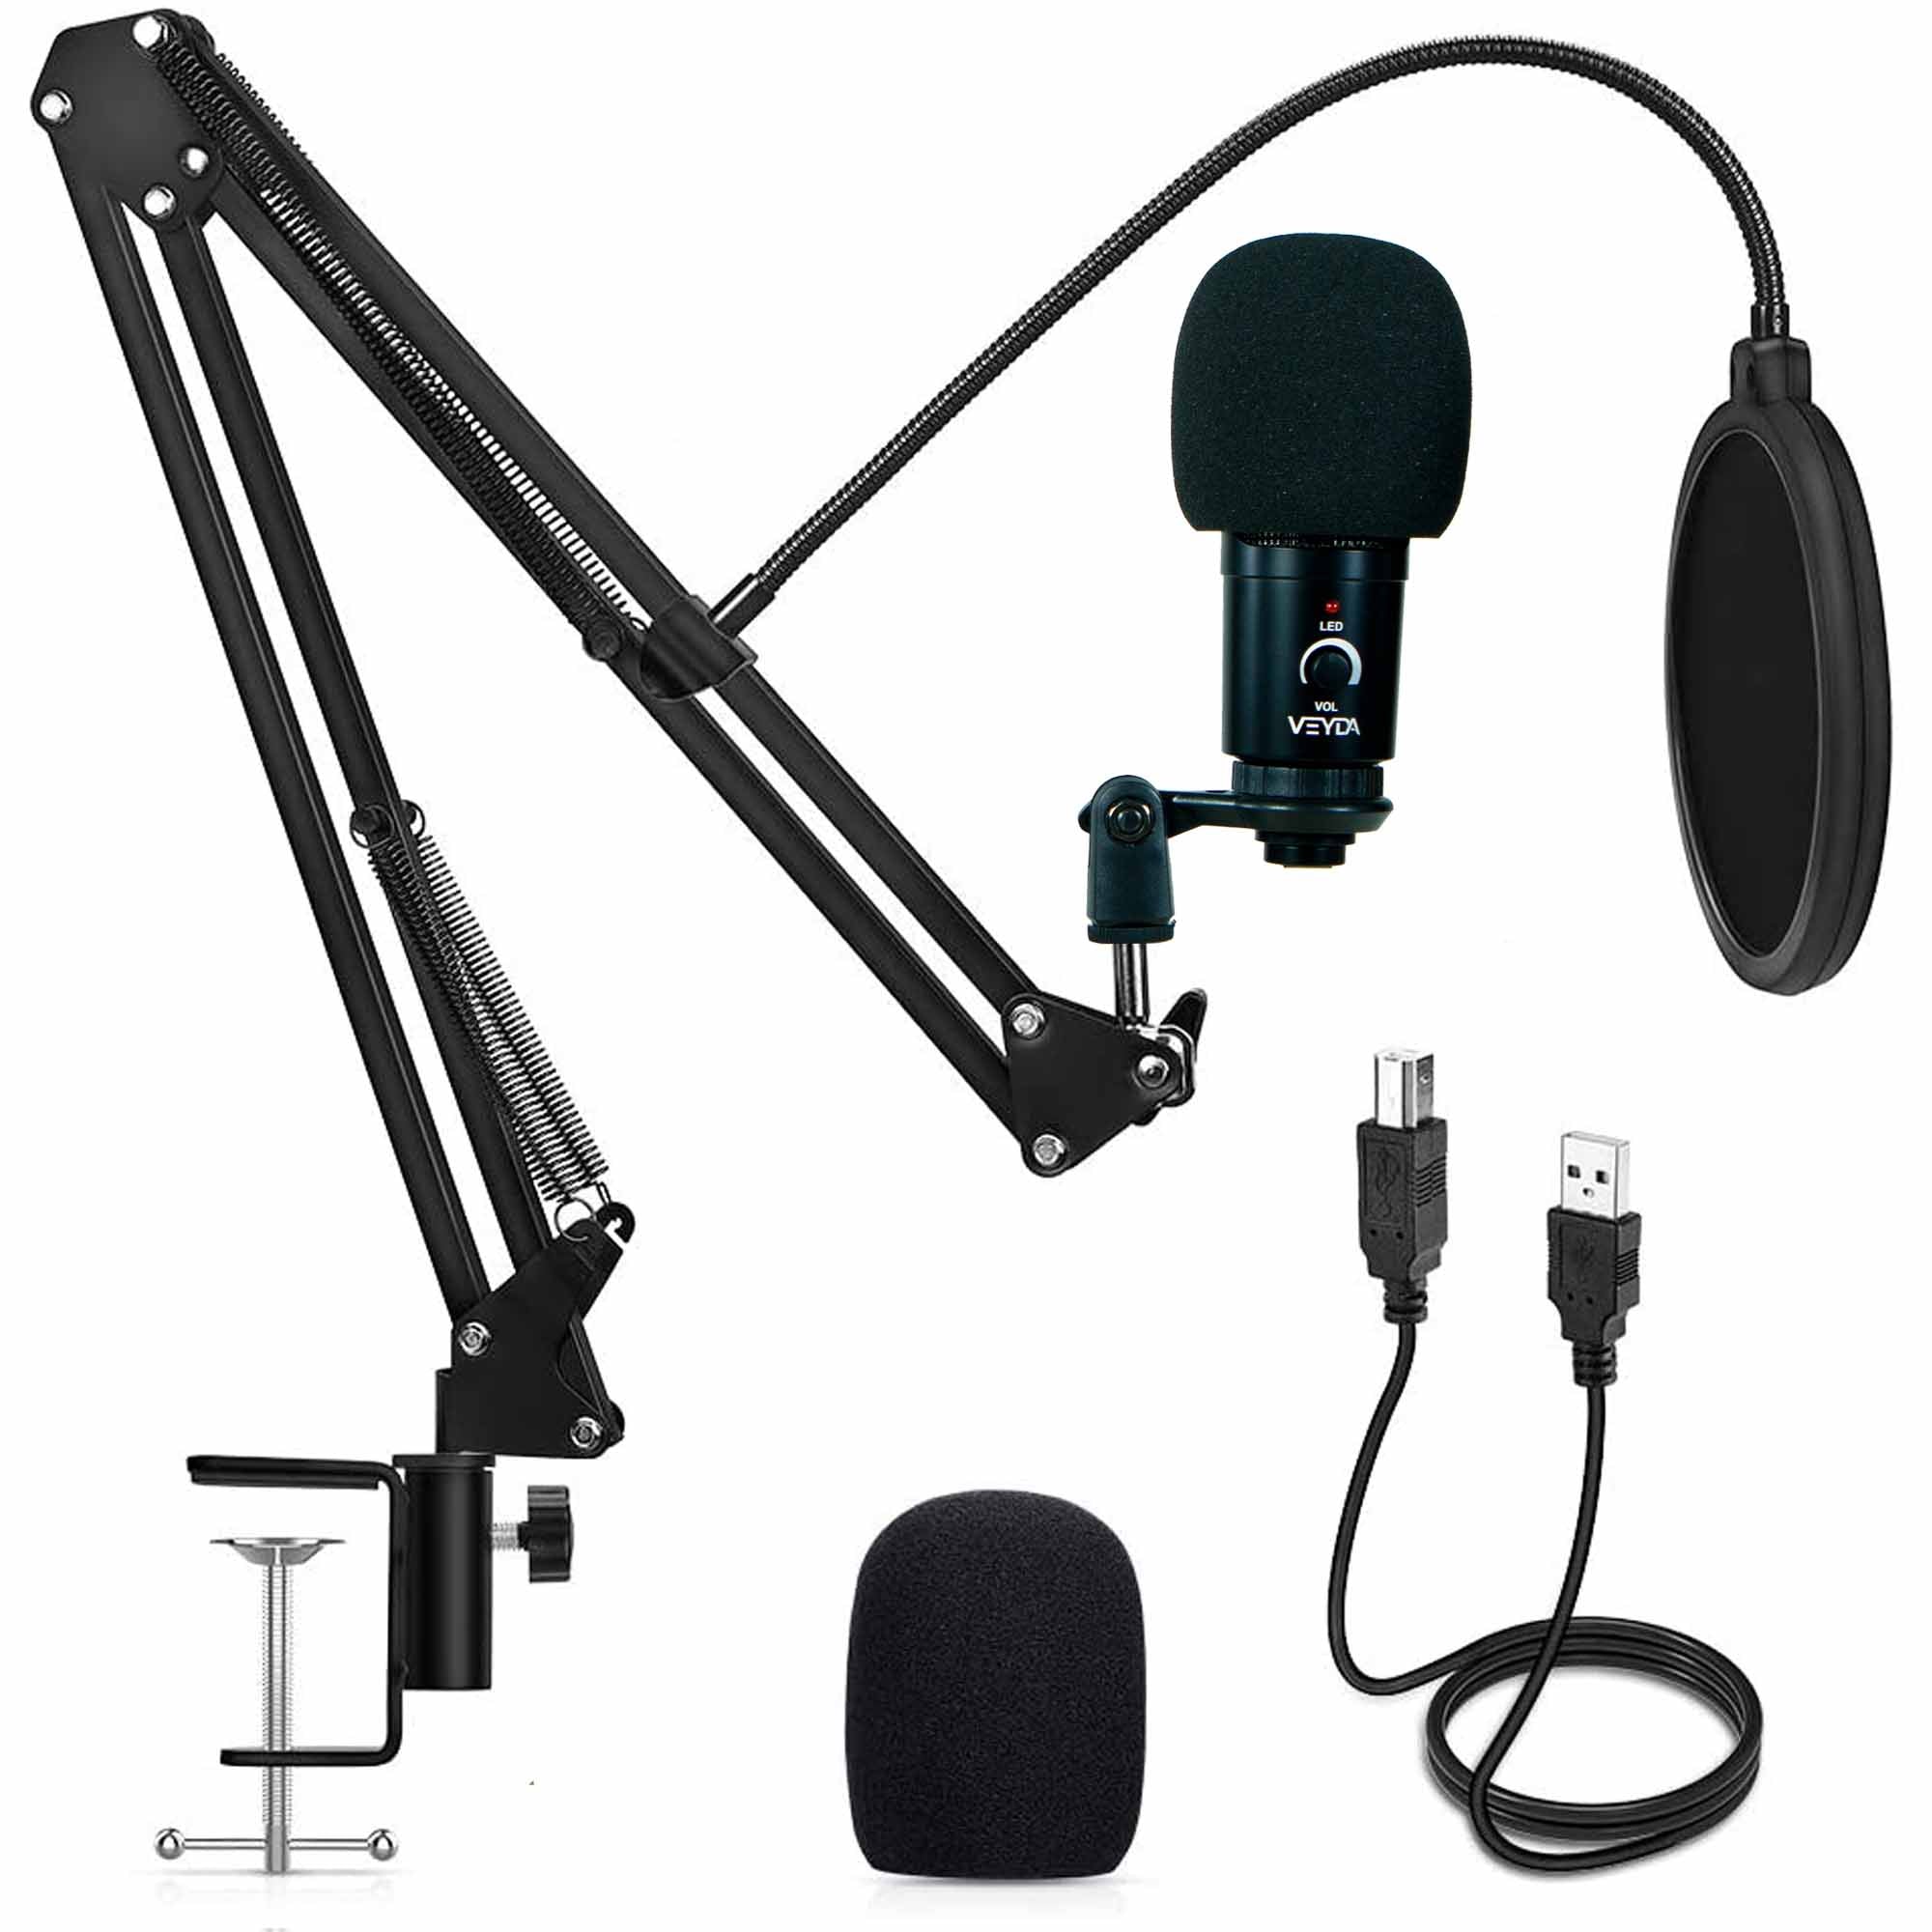 VEYDA USB Condenser Microphone - Professional Grade Plug & Play Desktop Cardioid Condenser Mic with Boom Arm and Shock Mount for Home Studios/Podcast - CamCaddie.com